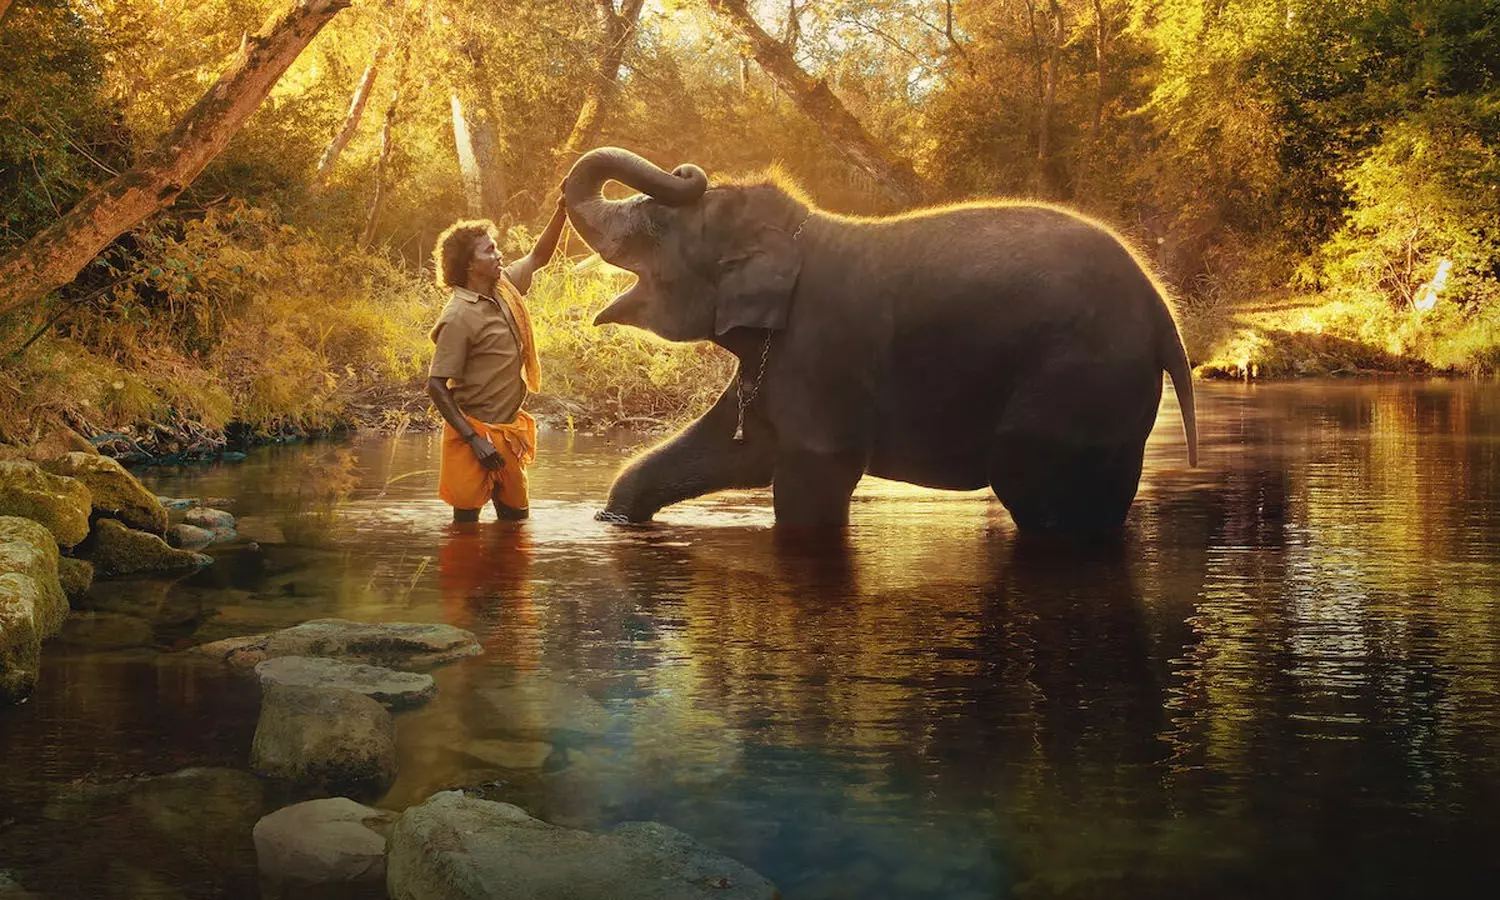 Indian film The Elephant Whisperers wins Best Documentary Short at the Oscars